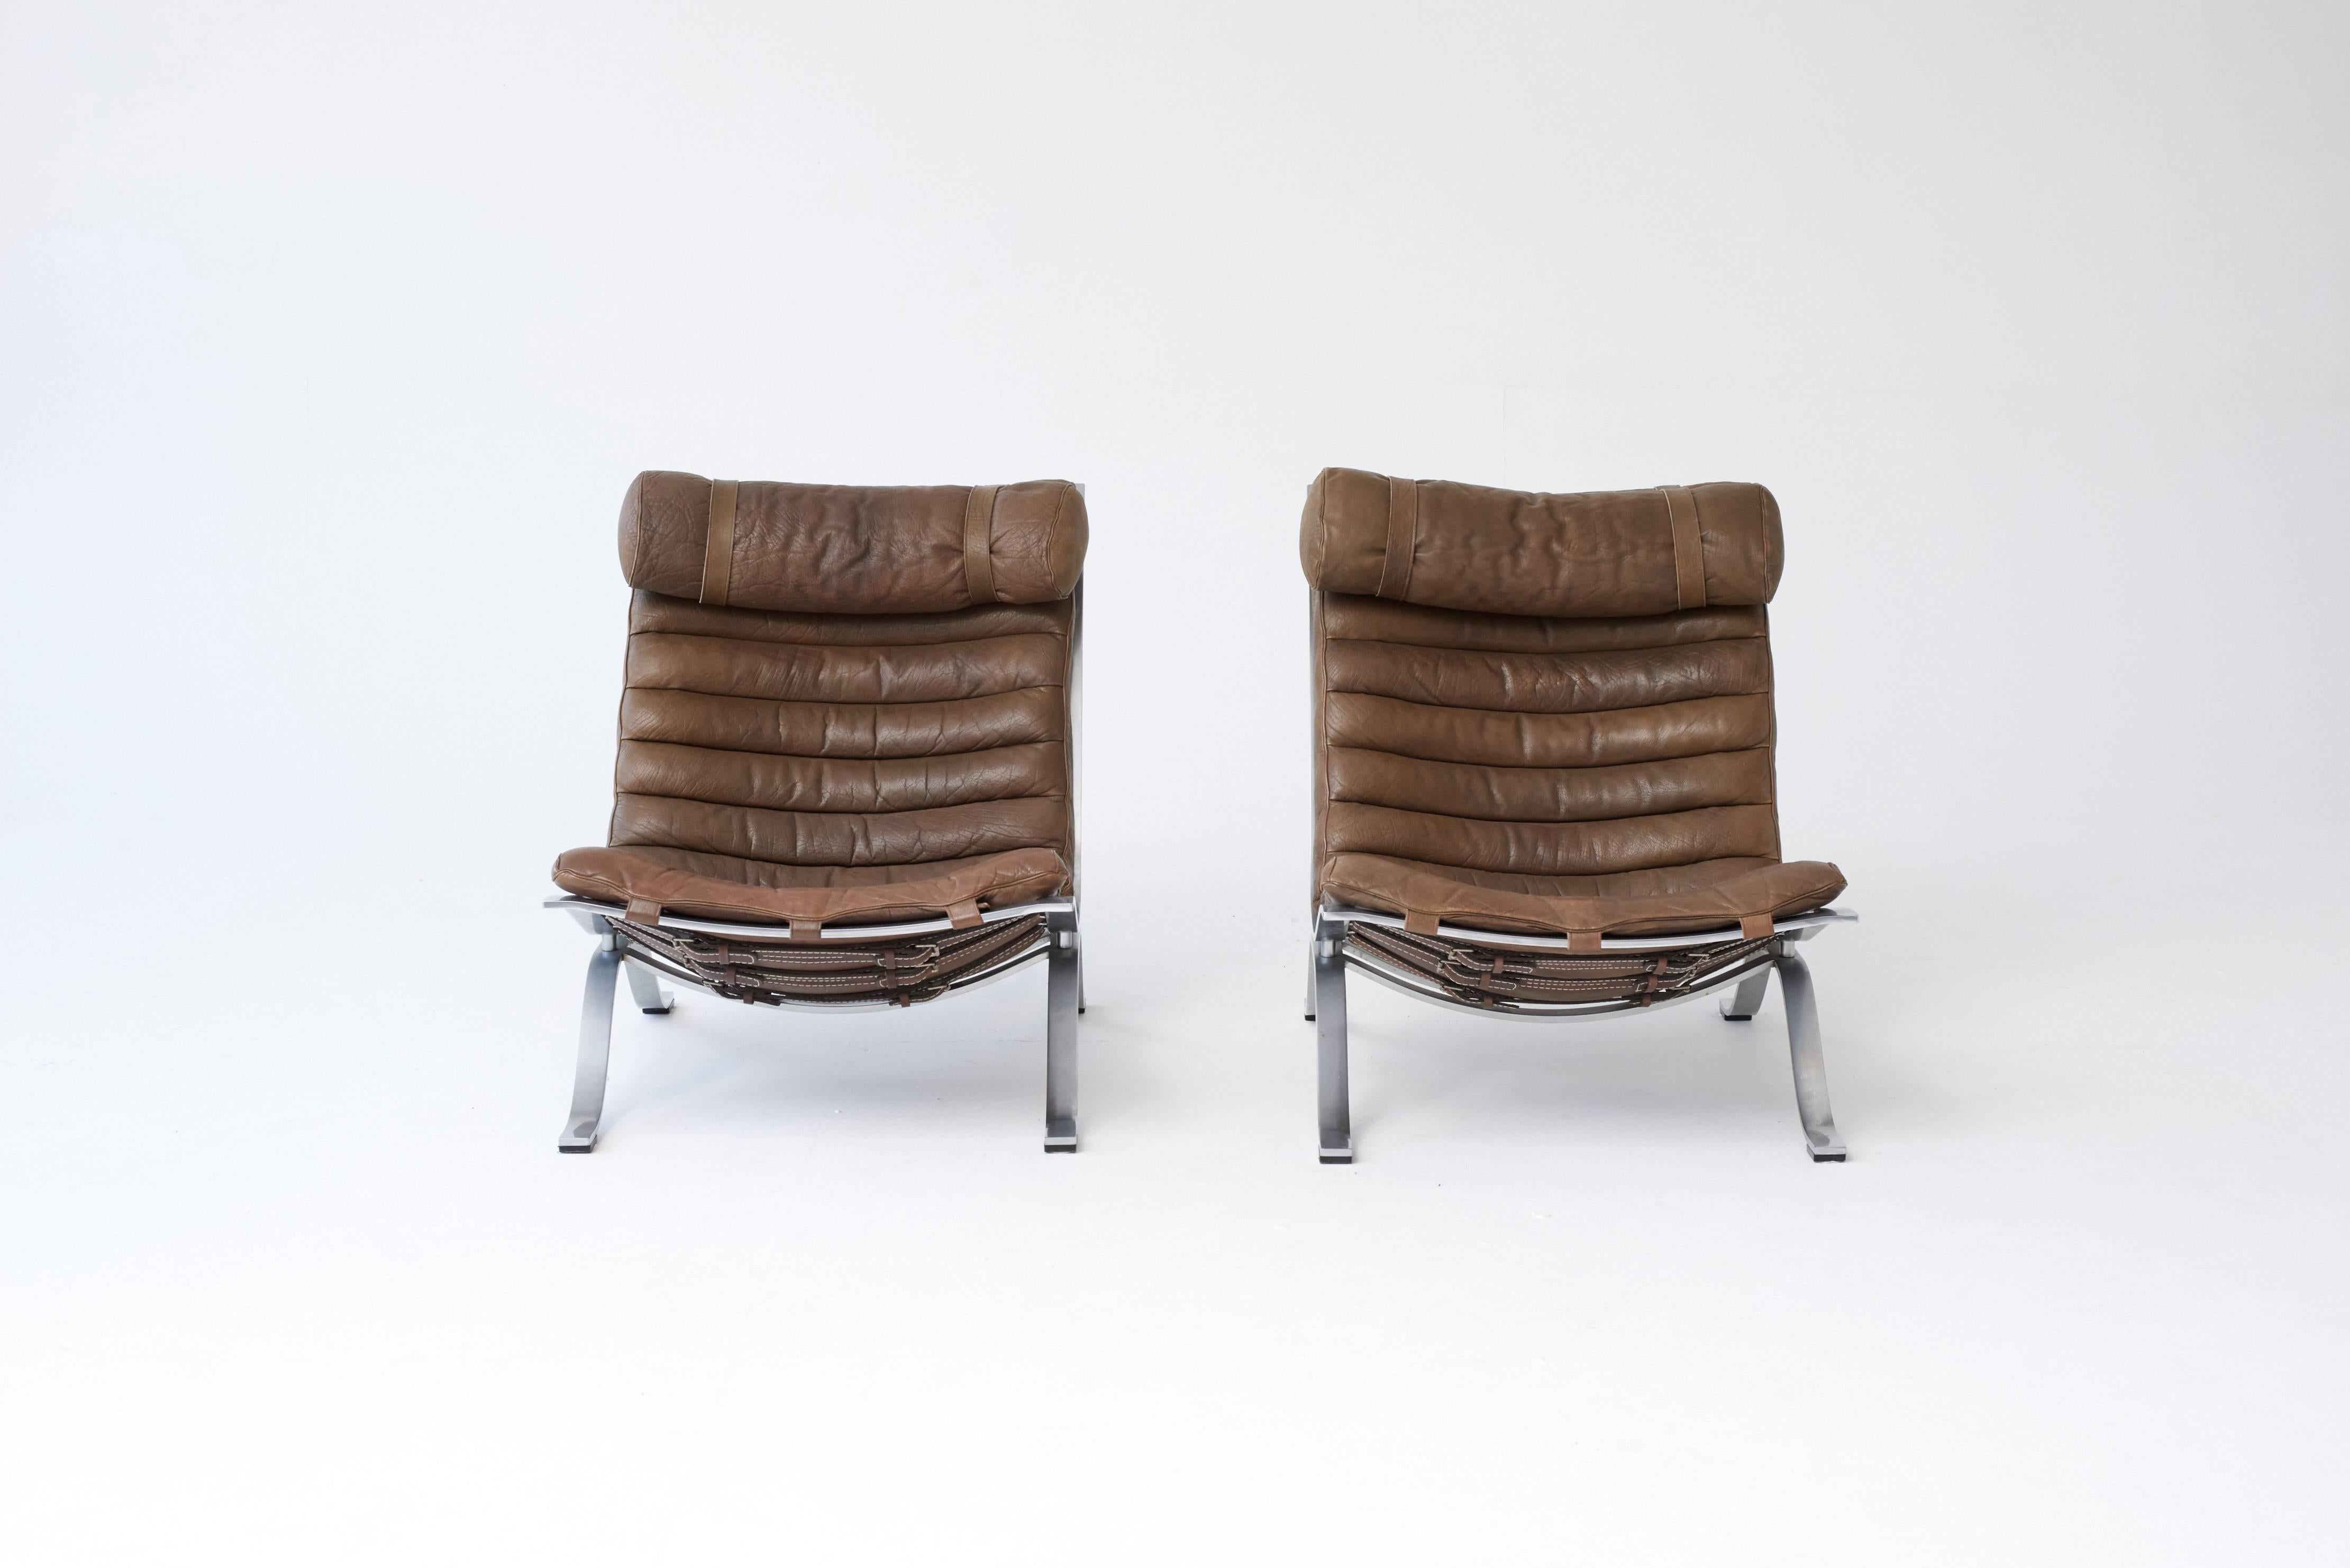 20th Century Pair of Arne Norell Ari Chairs, Norell Mobler, Sweden, 1970s